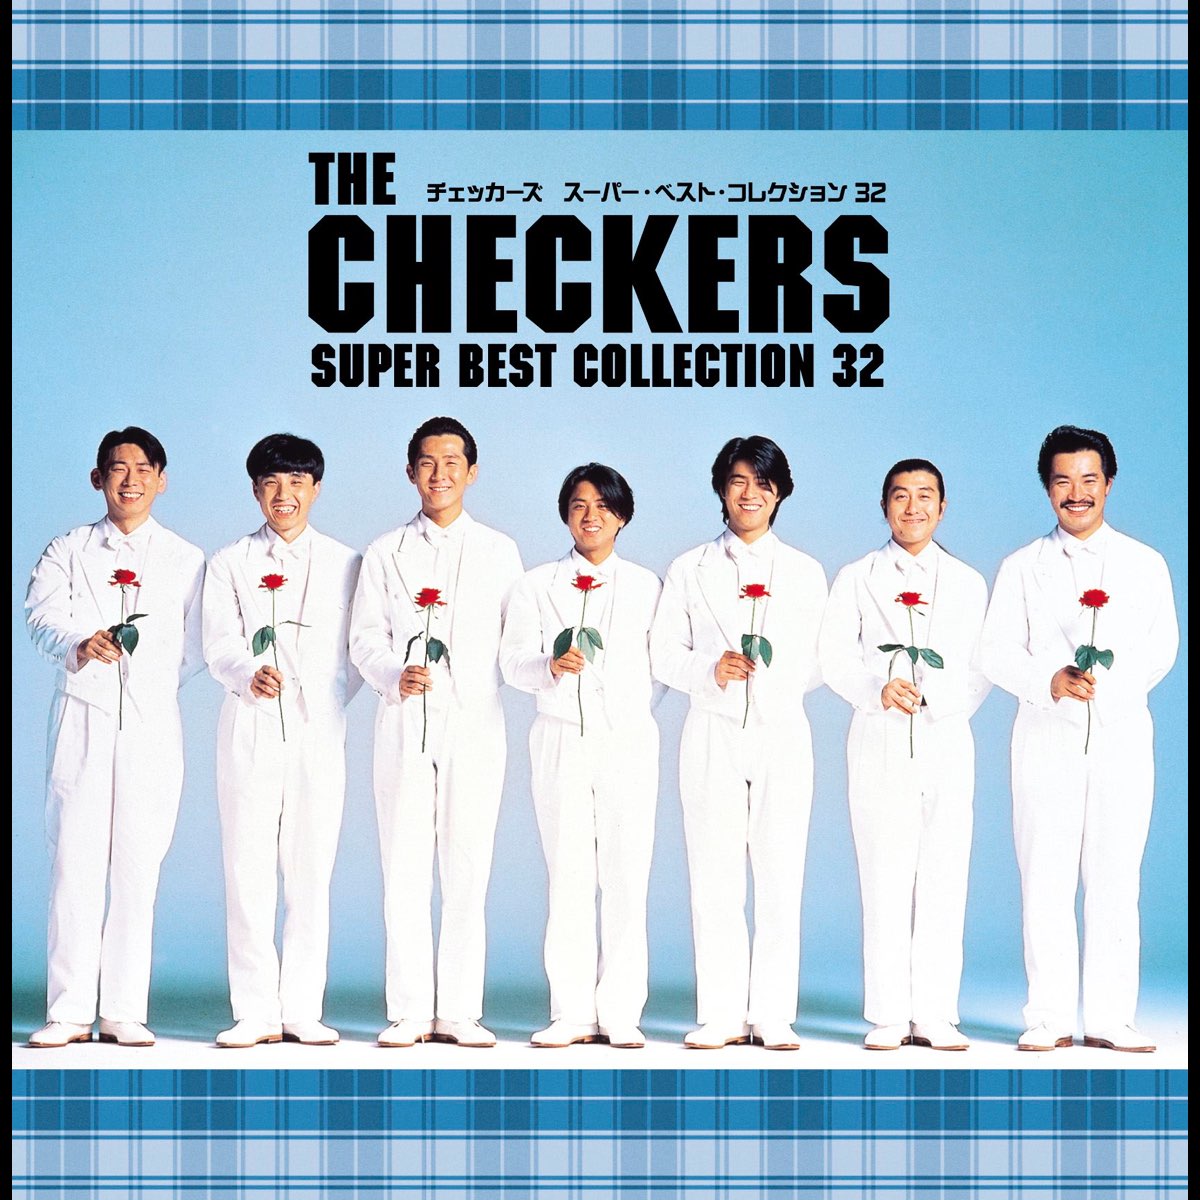 The Checkers группа. The Checkers группа Фумия. Супер Бест. Best collection. Best collection 2